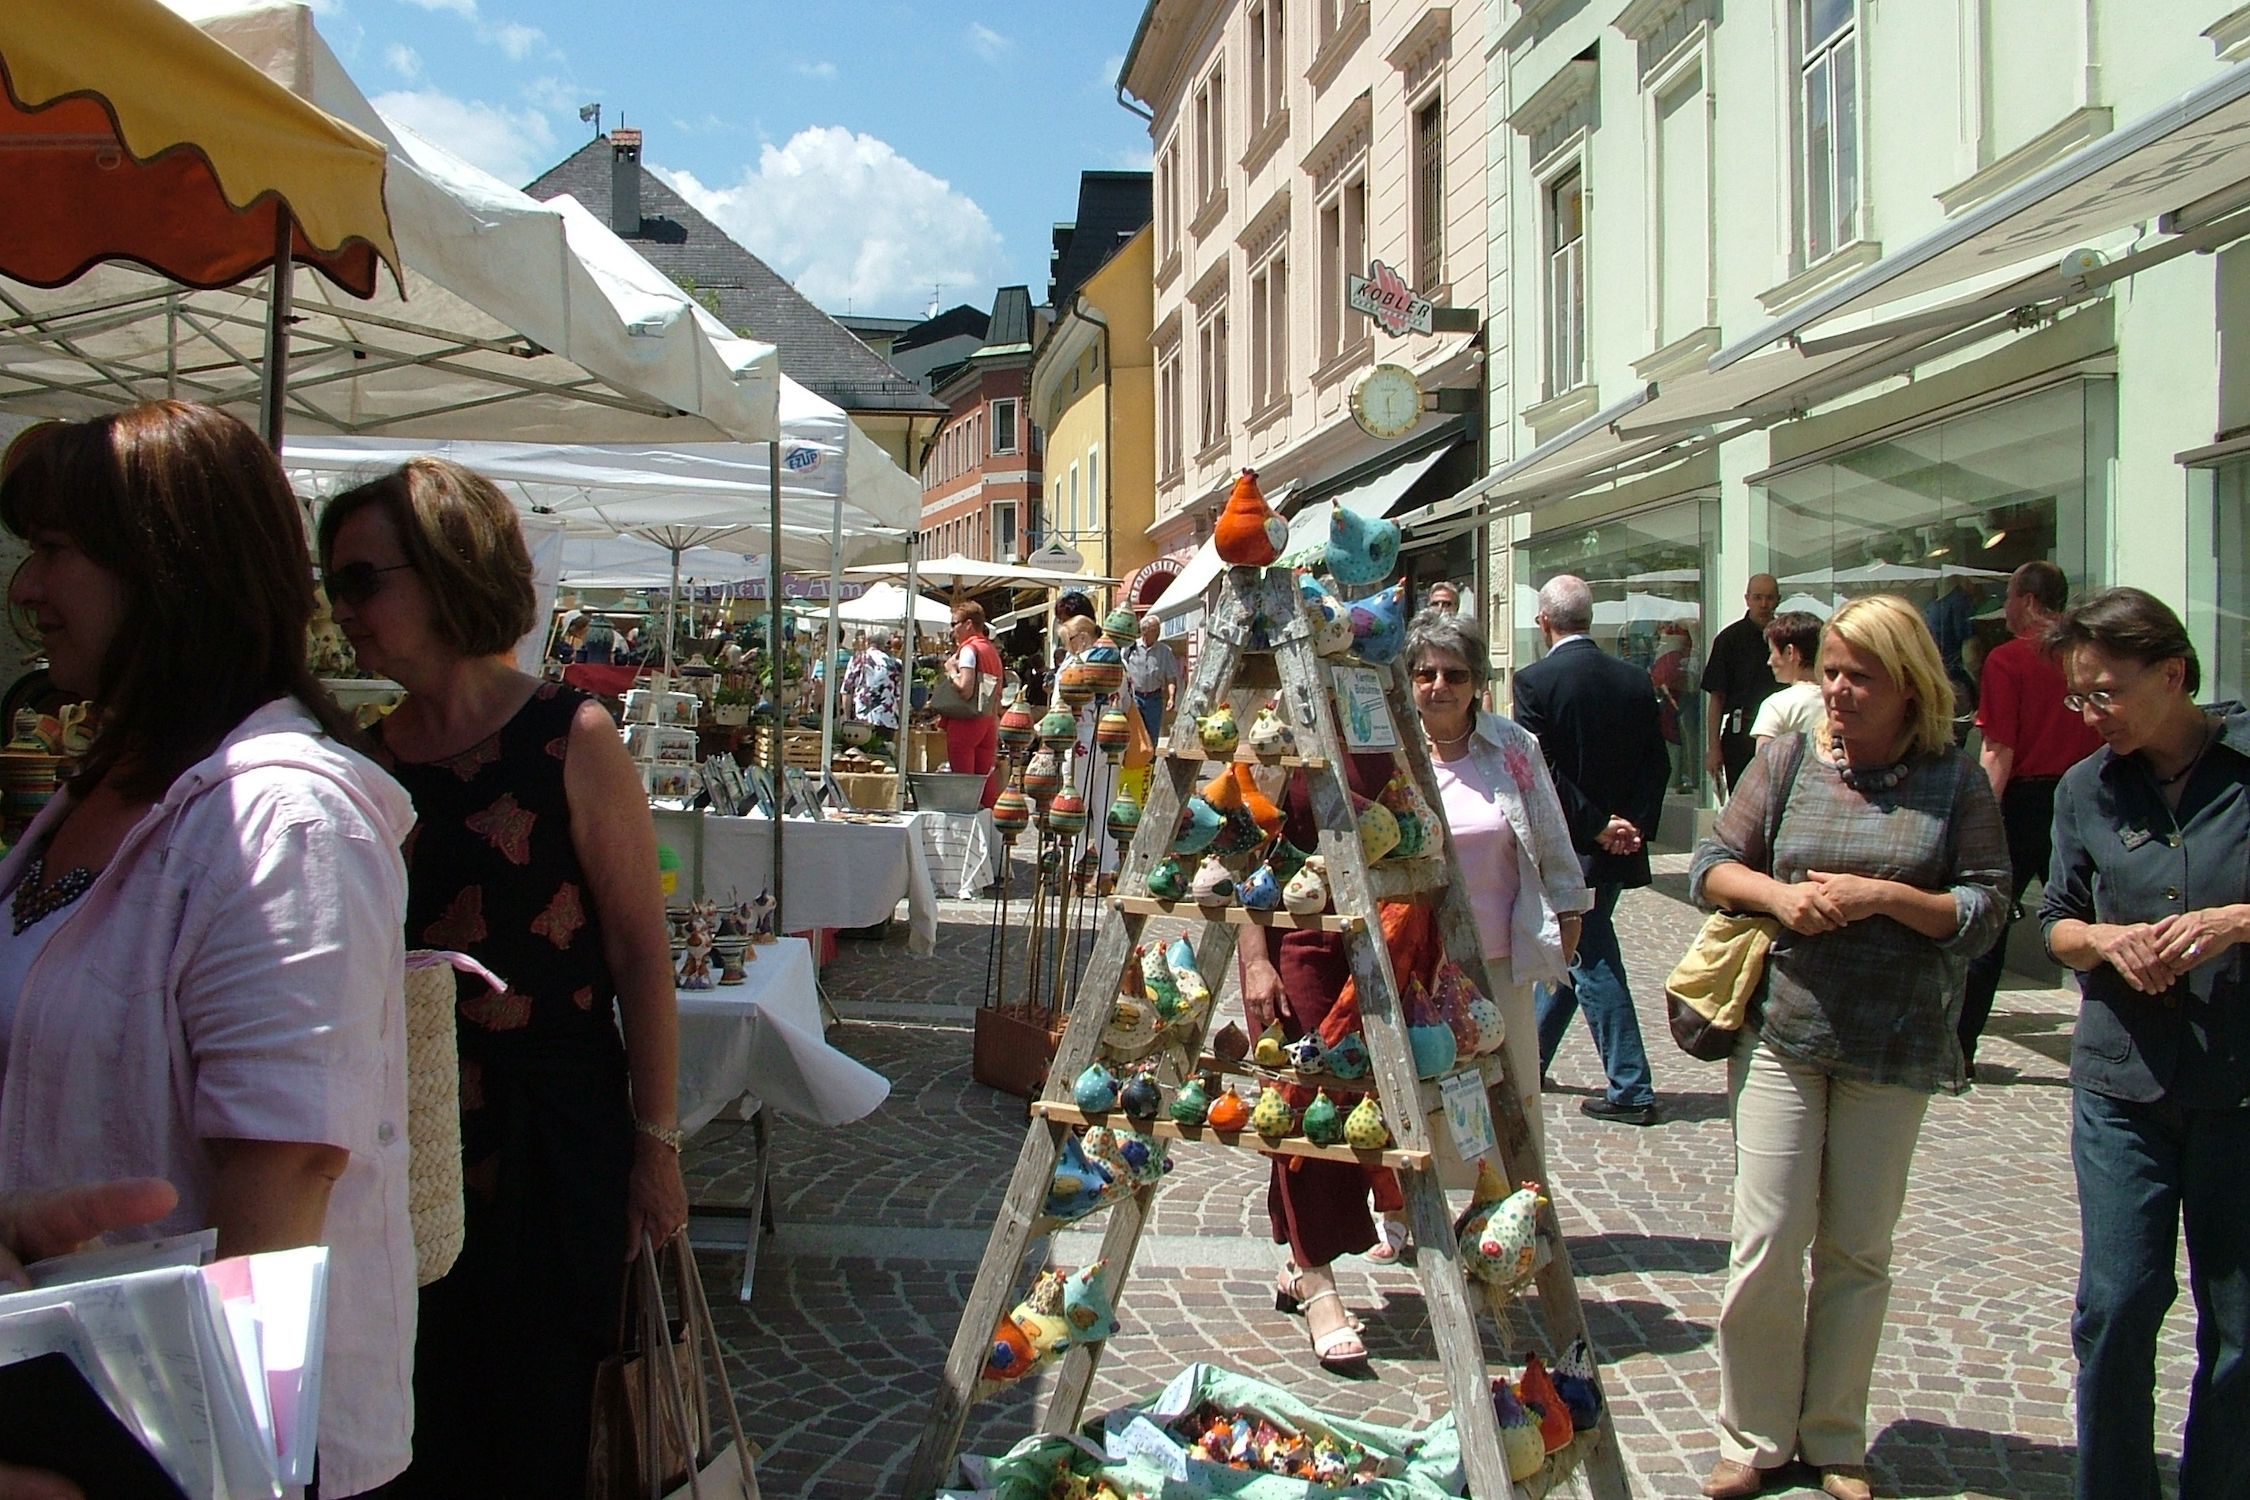 Artists offer their wares made of ceramics in Villach's city centre